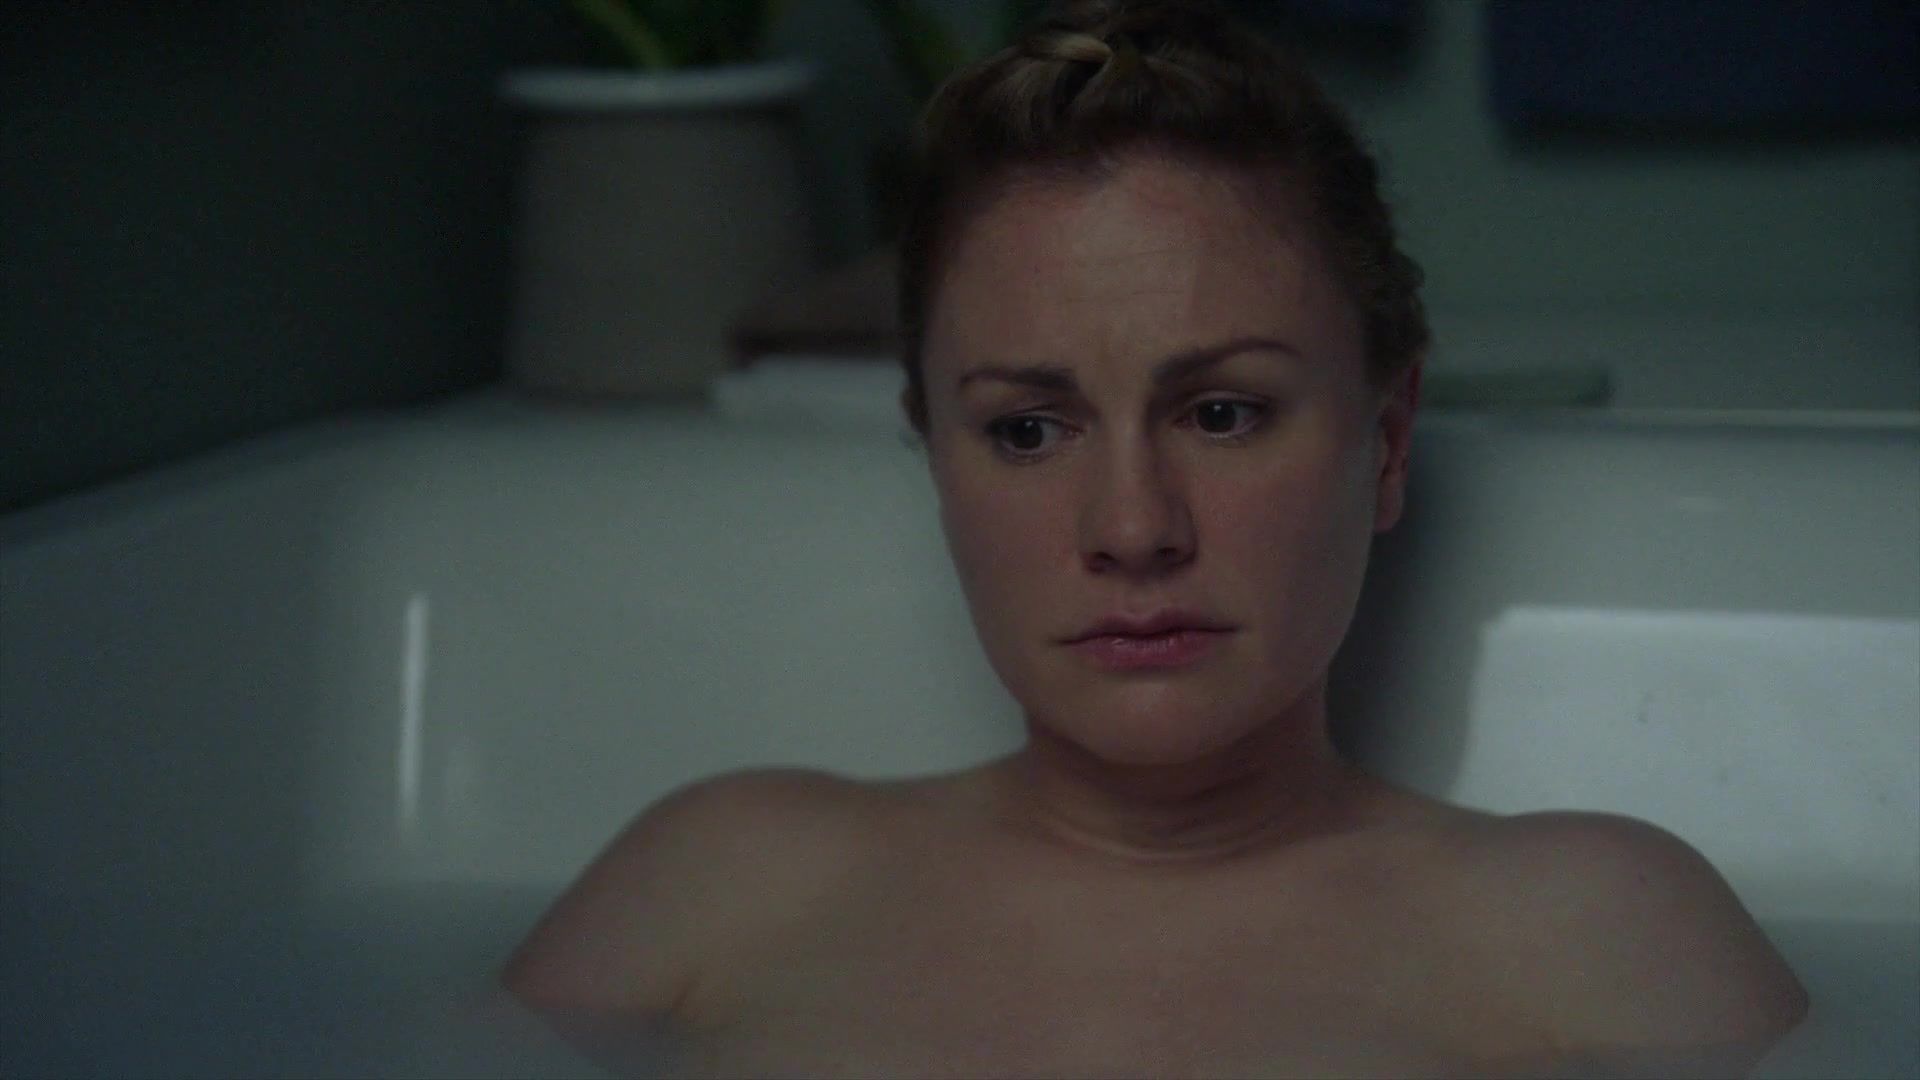 RealityKings Anna Paquin naked - The Affair s05e01 (2019) Full Movie - 2